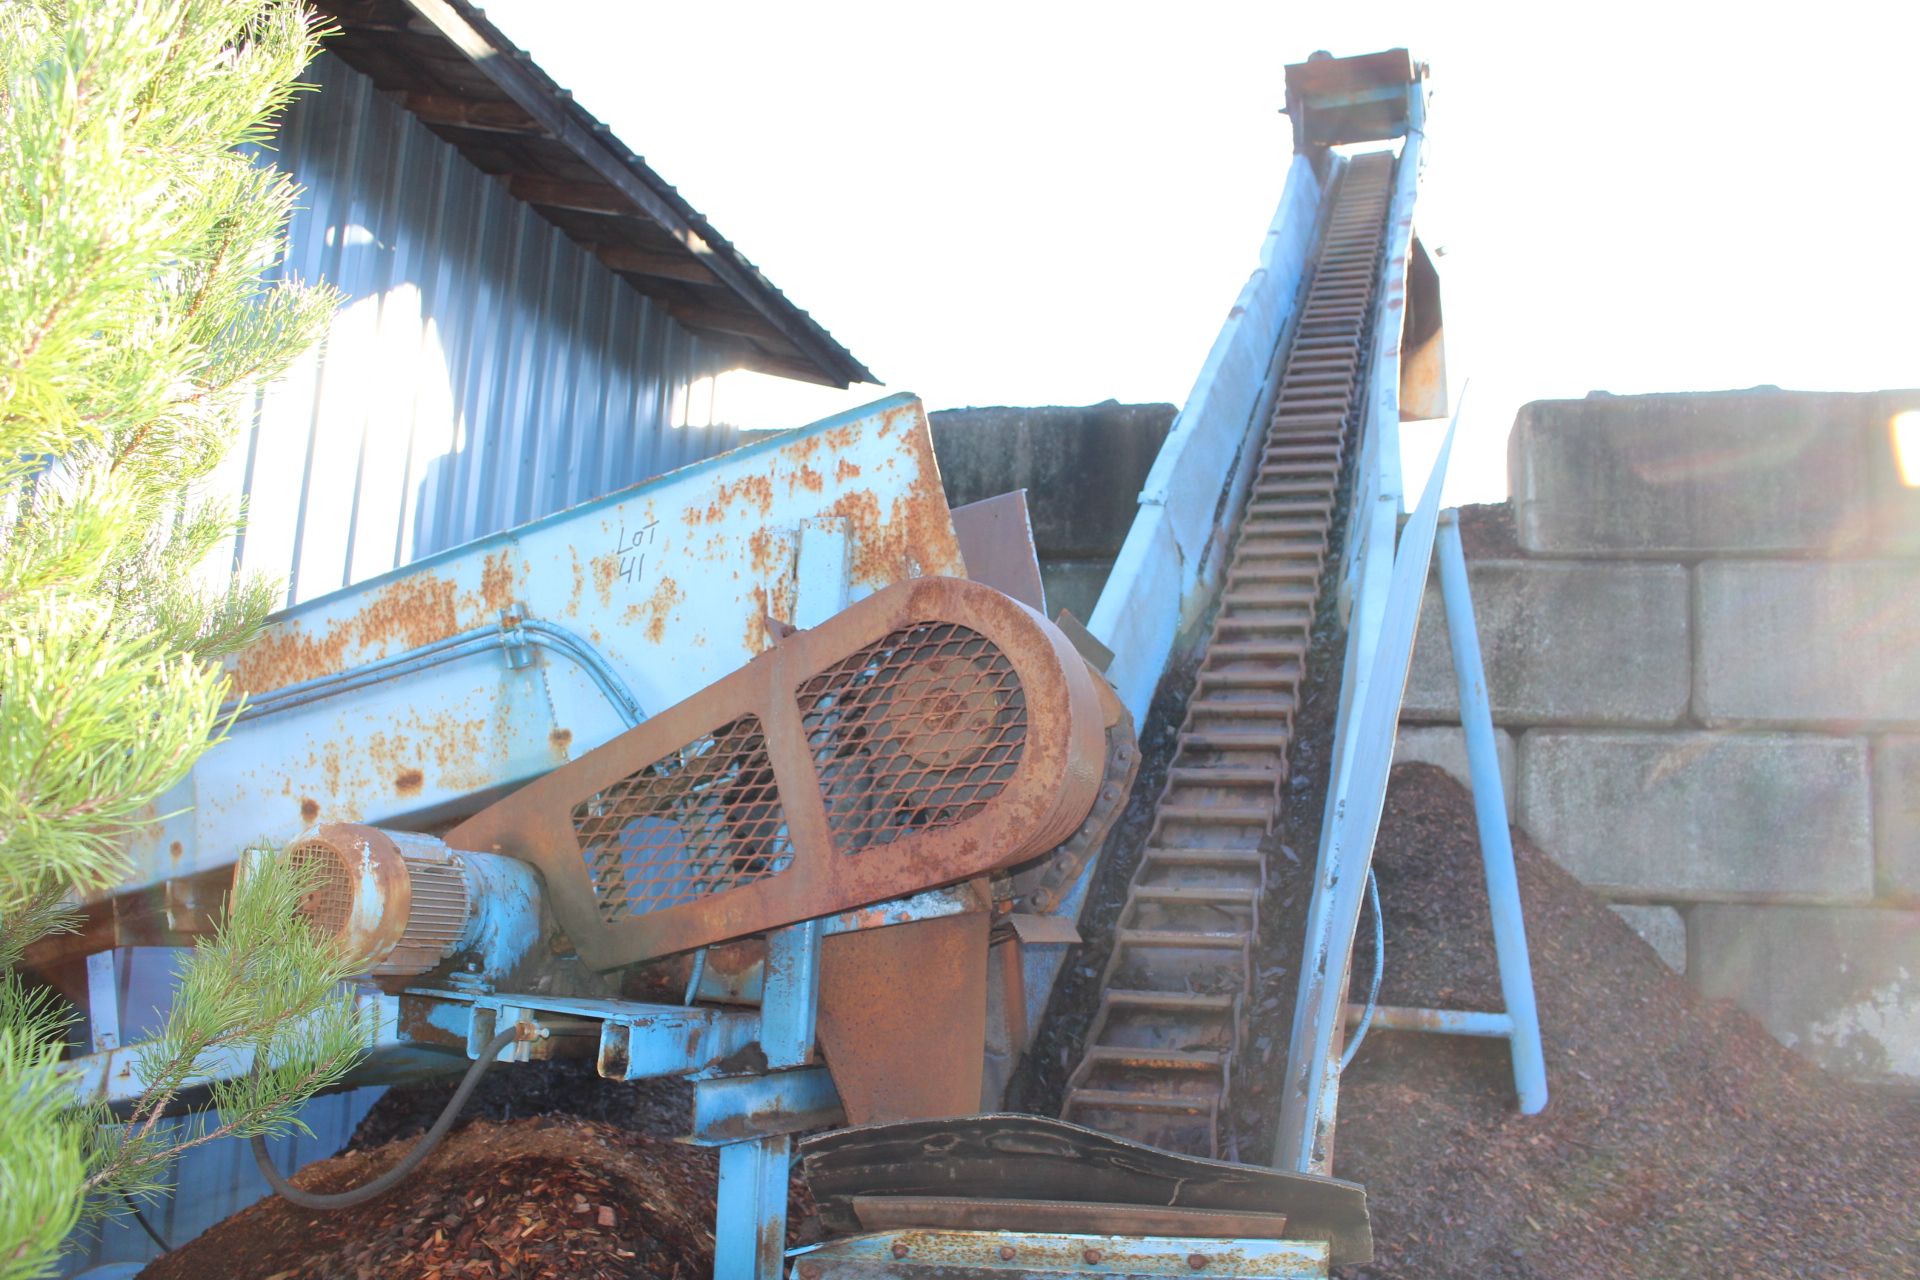 INCLINE BOX CHAIN CHIP CONVEYOR, 12" X 32'; W/ MOTOR & REDUCER - Image 2 of 2